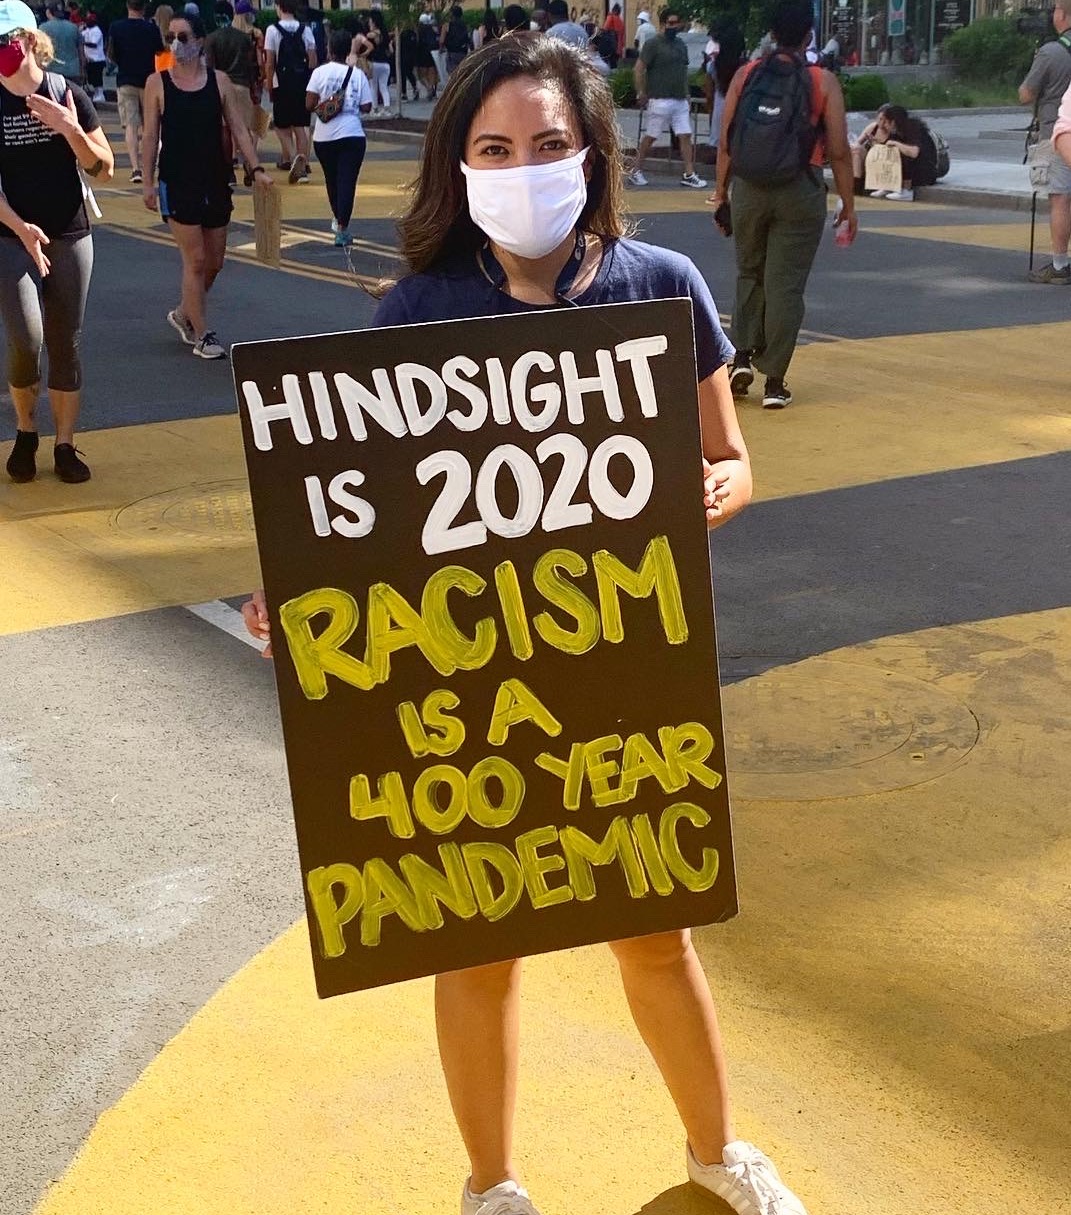 Nina Sabarre with "Hindsight is 2020. Racism is a 400 year pandemic" sign.